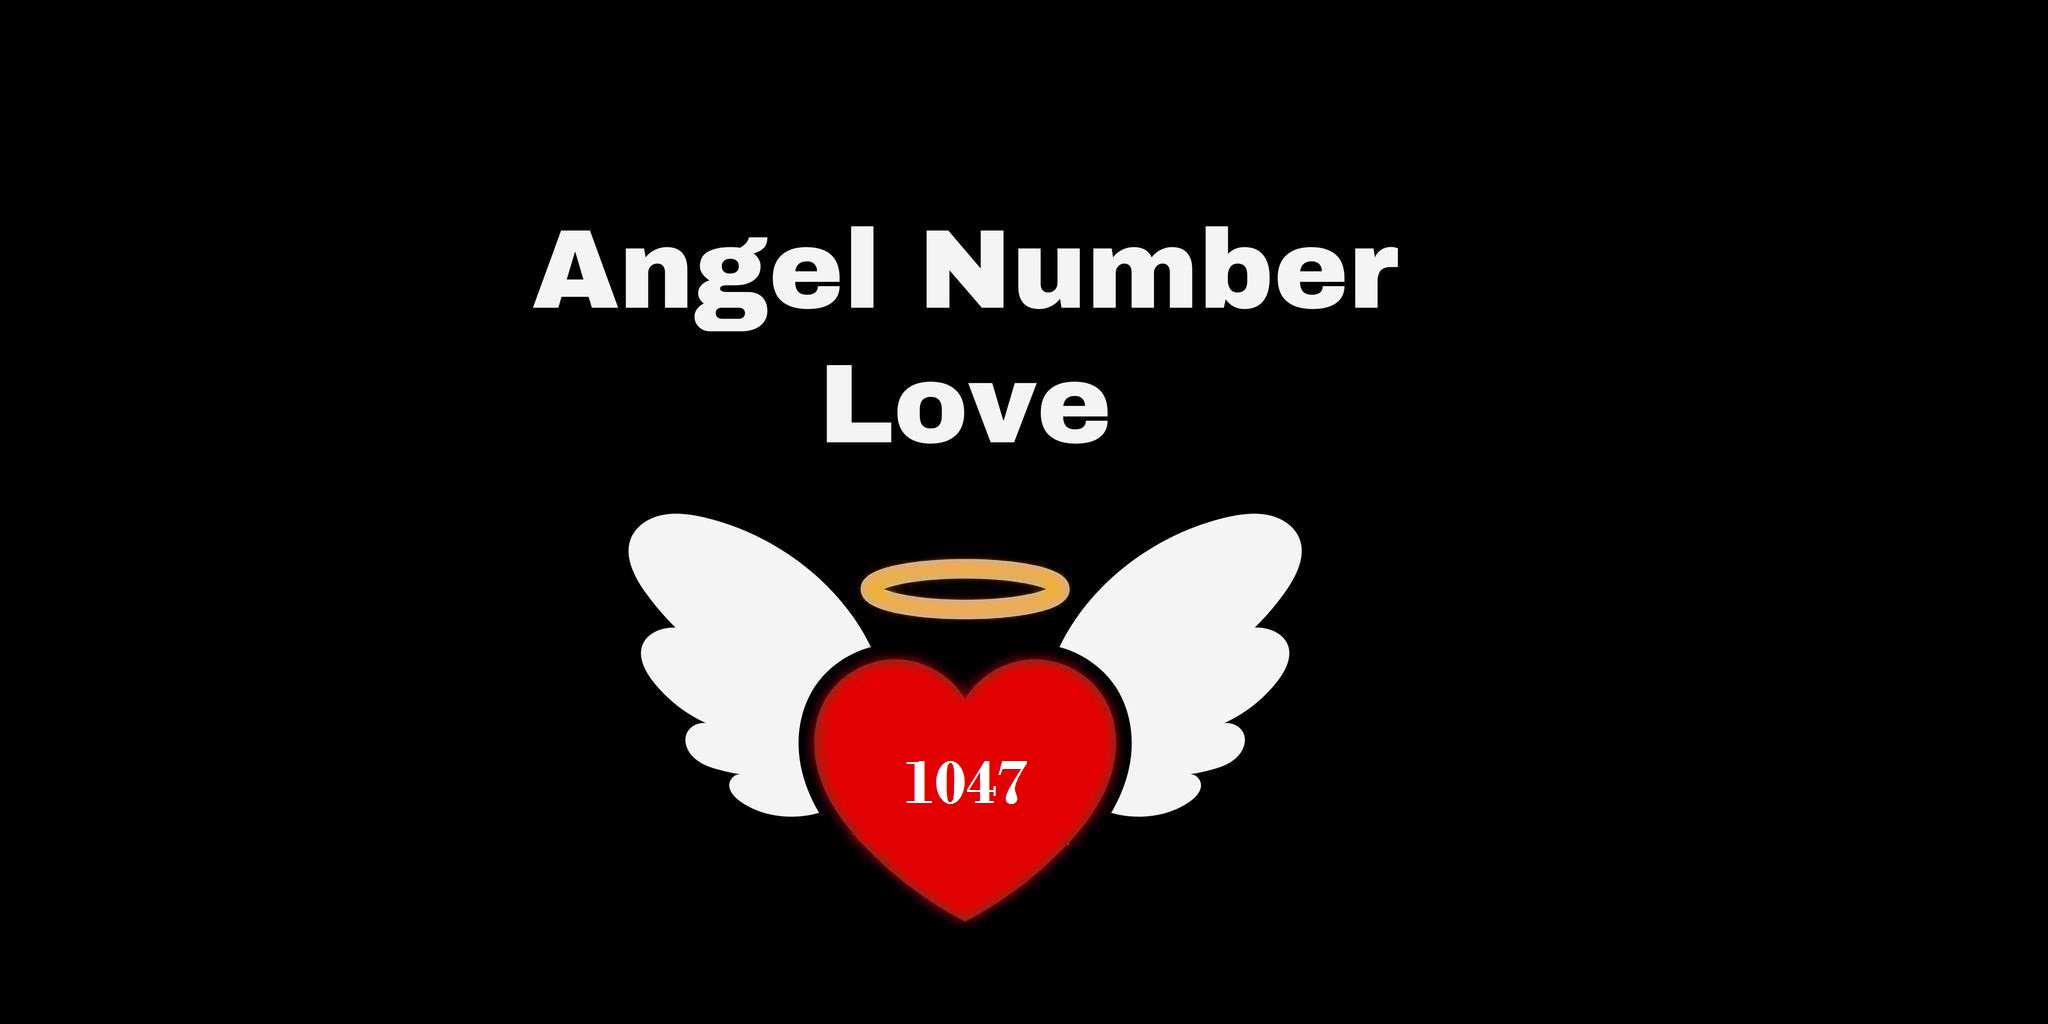 1047 Angel Number Meaning In Love